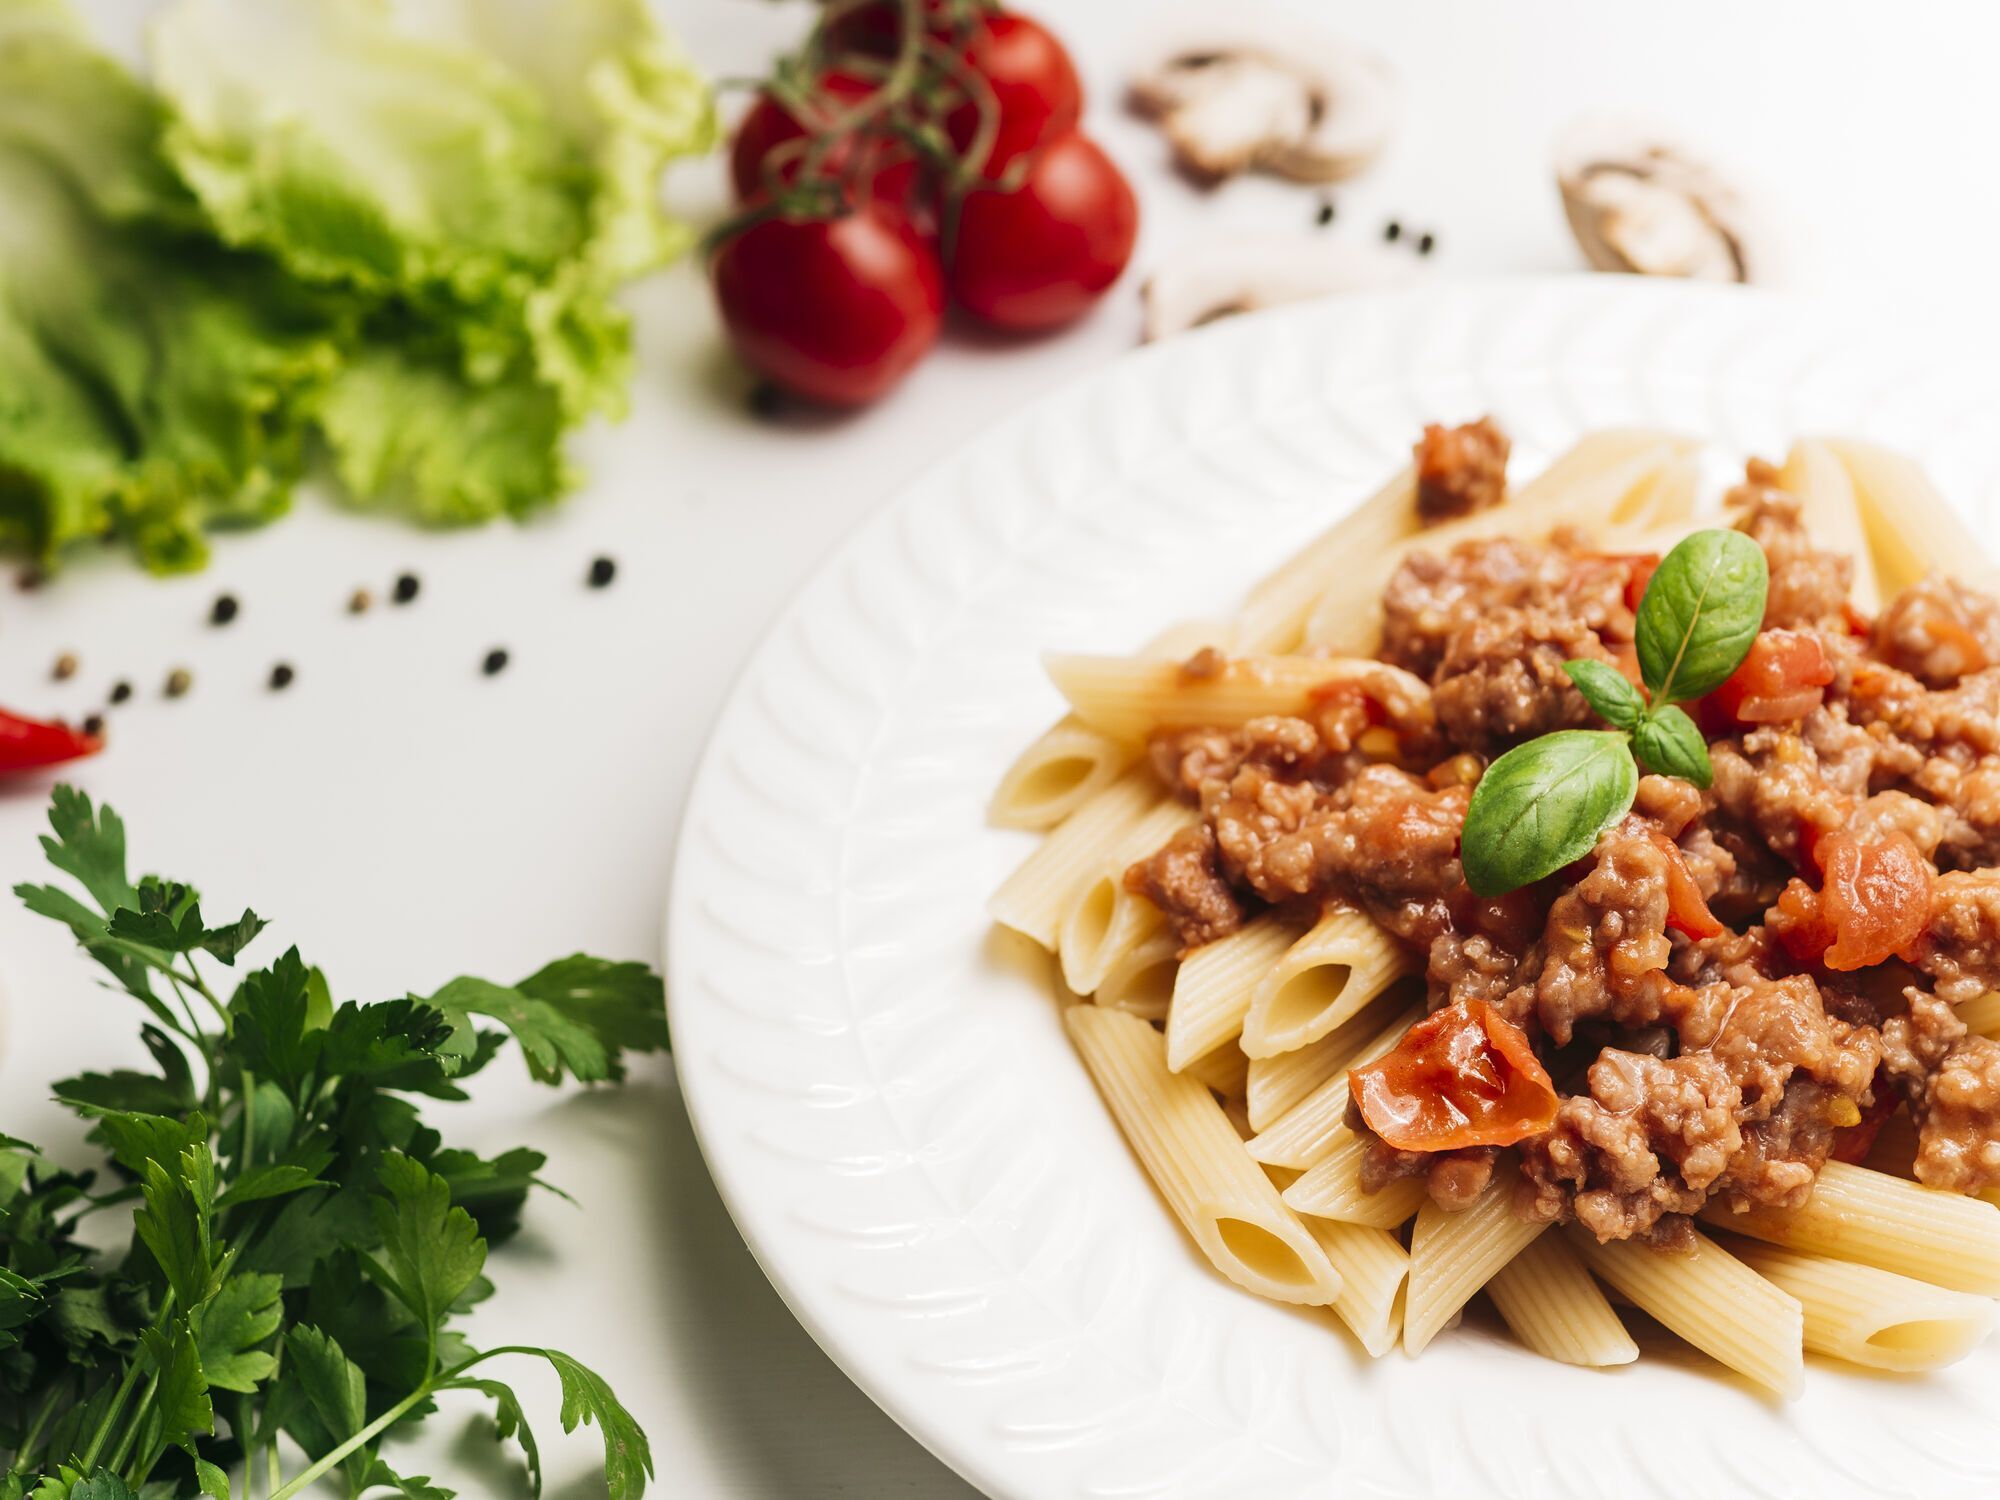 How to cook spaghetti bolognese according to the authentic recipe: tips from an Italian chef